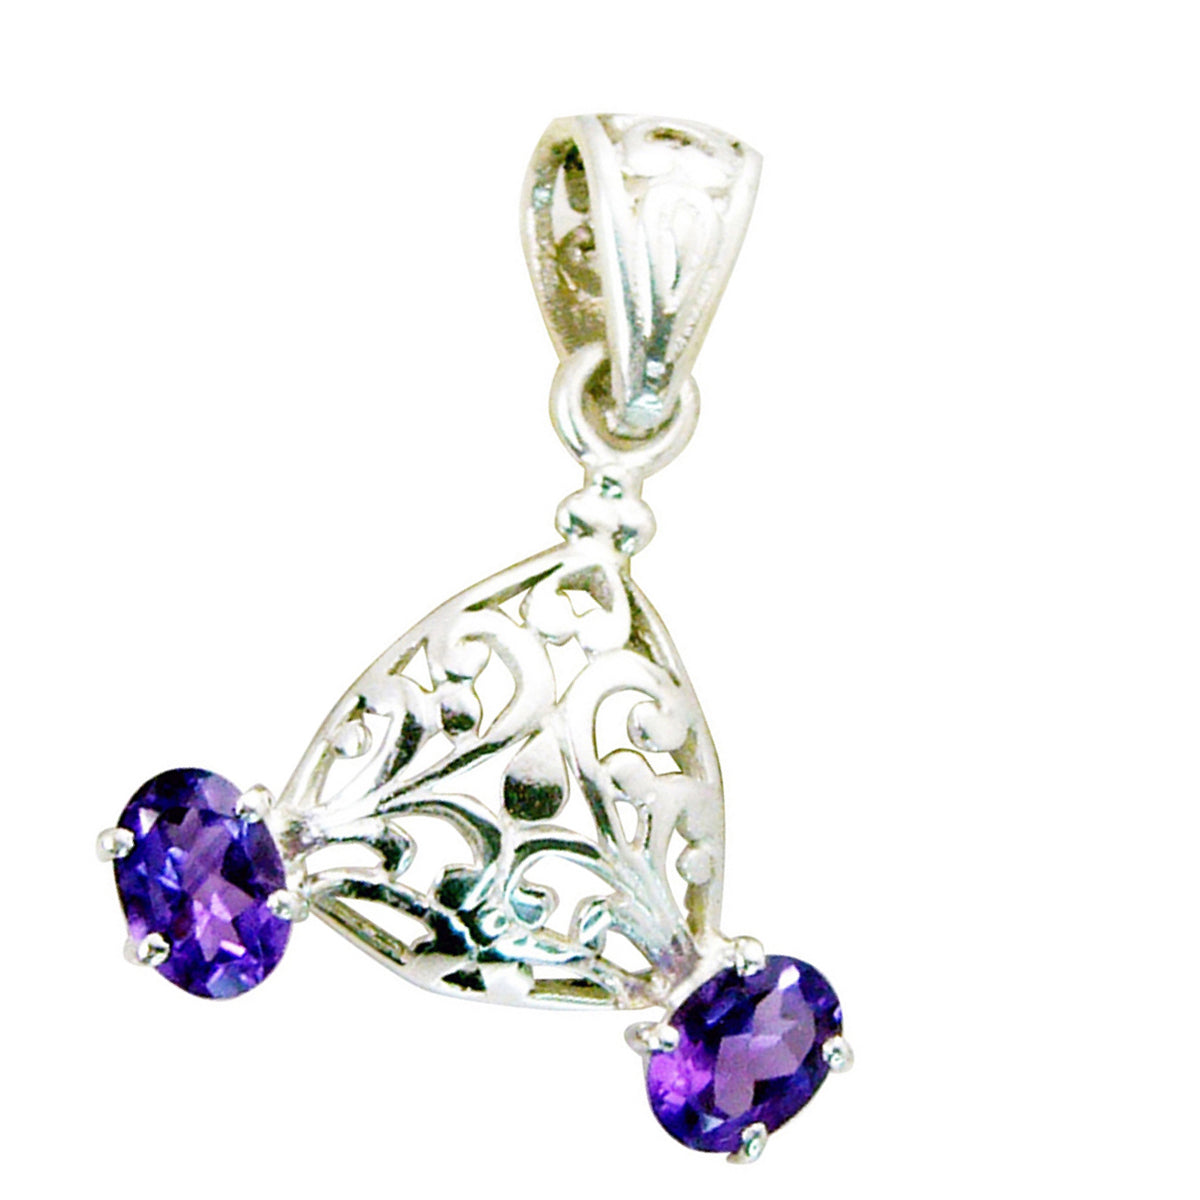 Riyo Smashing Gems Oval Faceted Purple Amethyst Solid Silver Pendant Gift For Good Friday